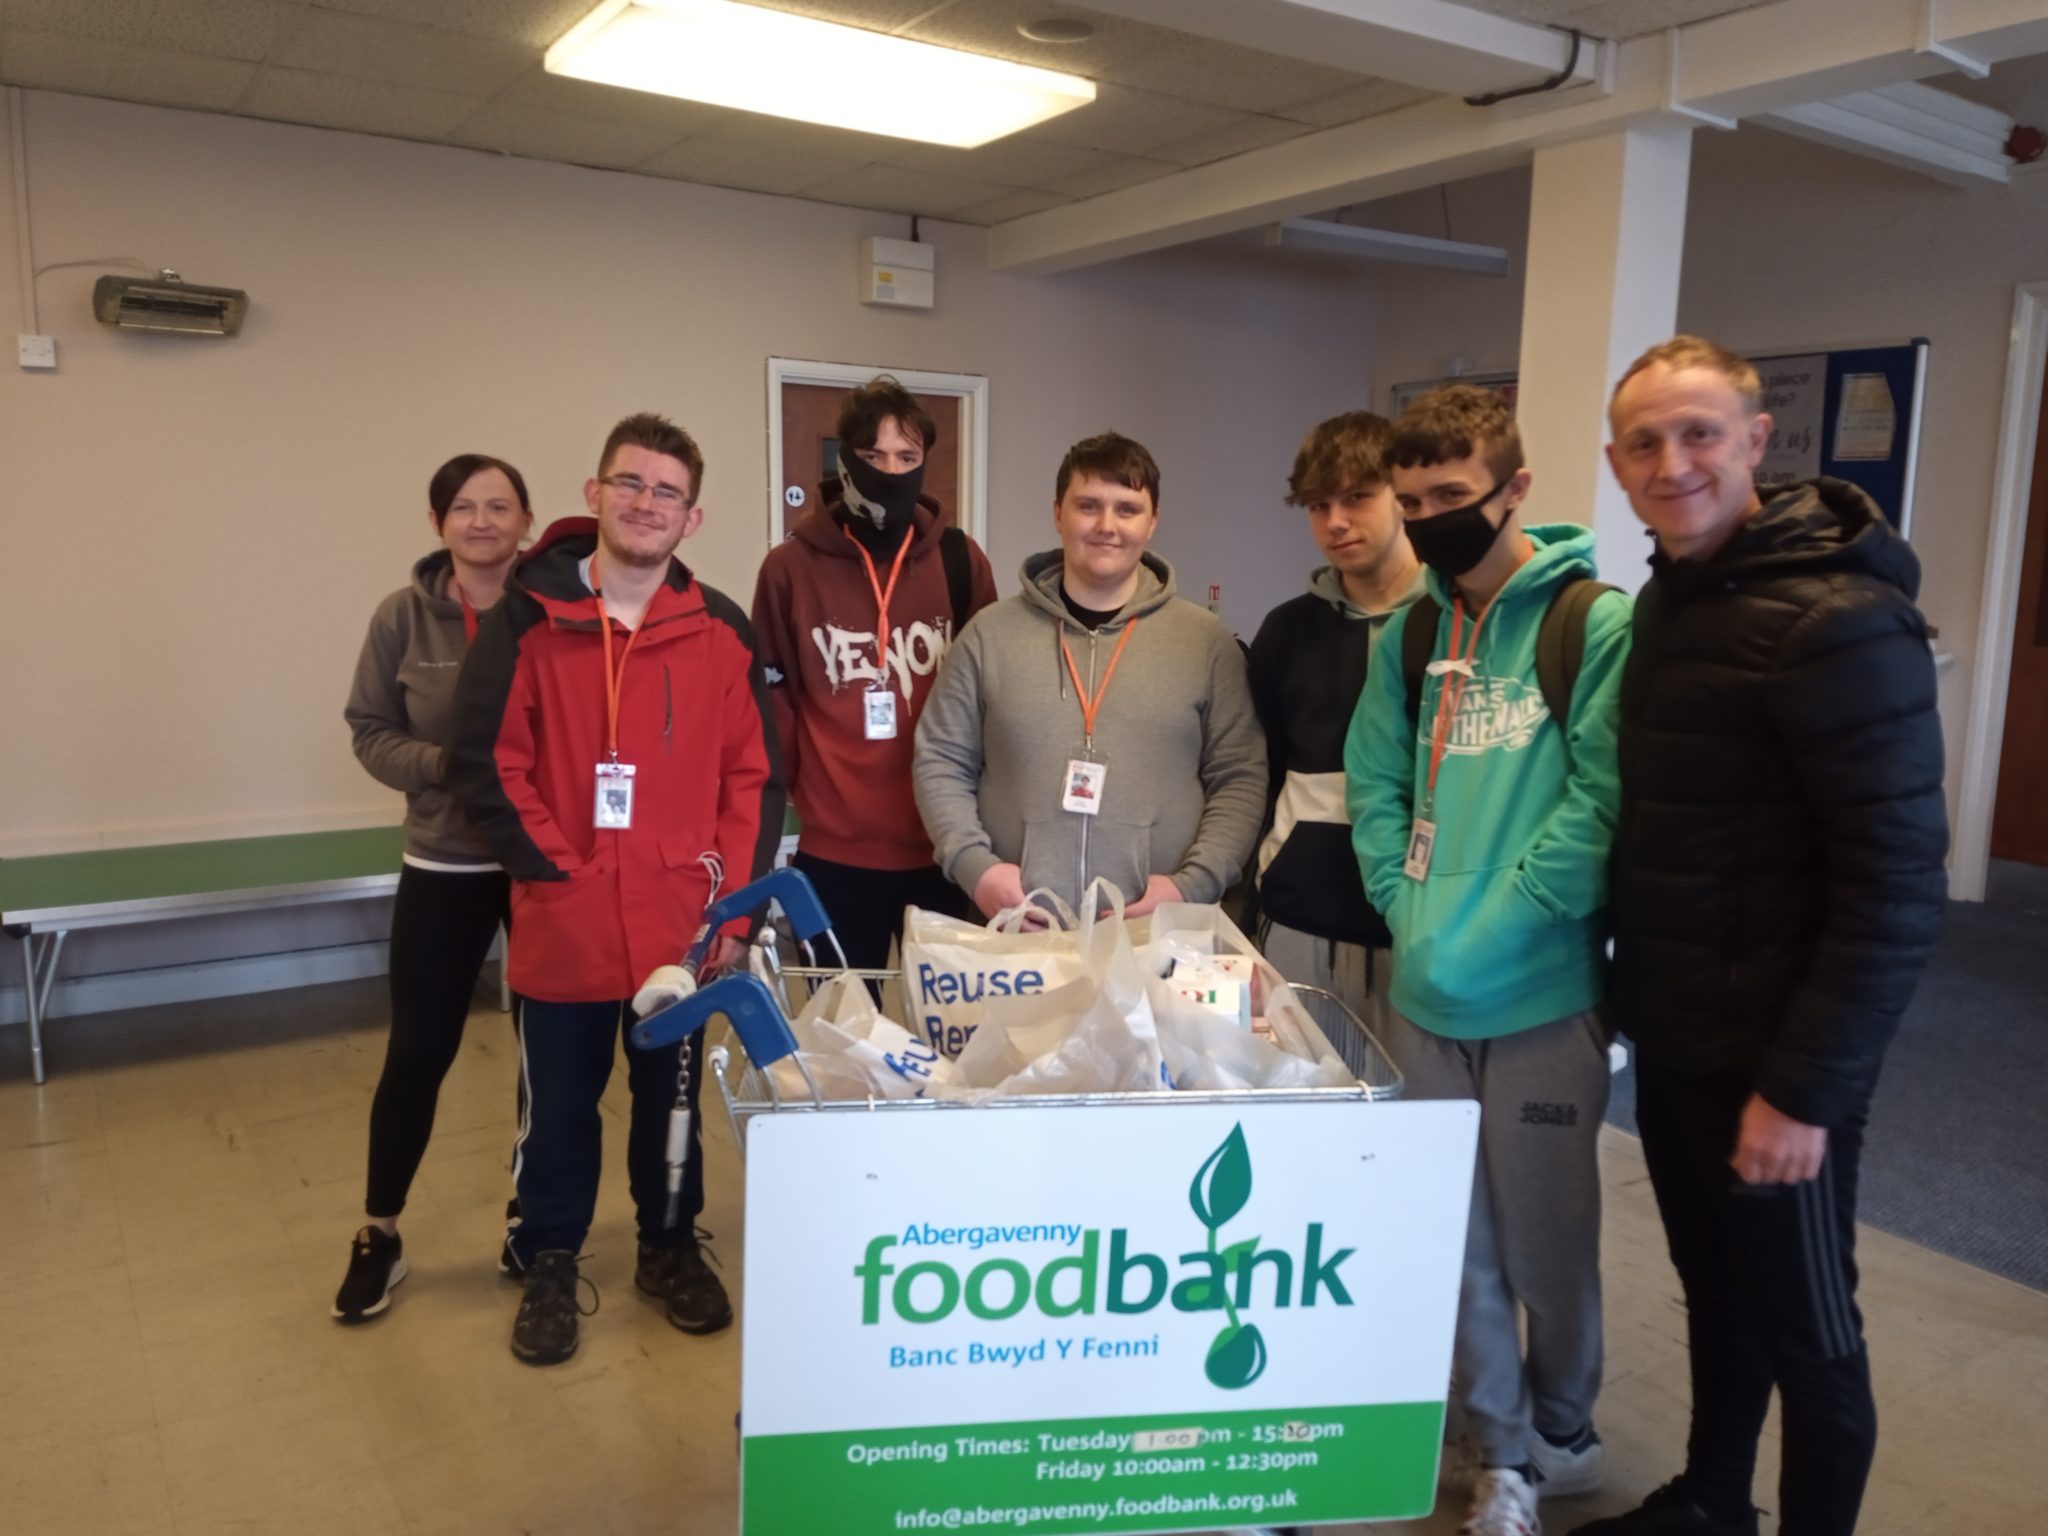 Thank you to Coleg Gwent, Independent Living Section | Abergavenny Foodbank